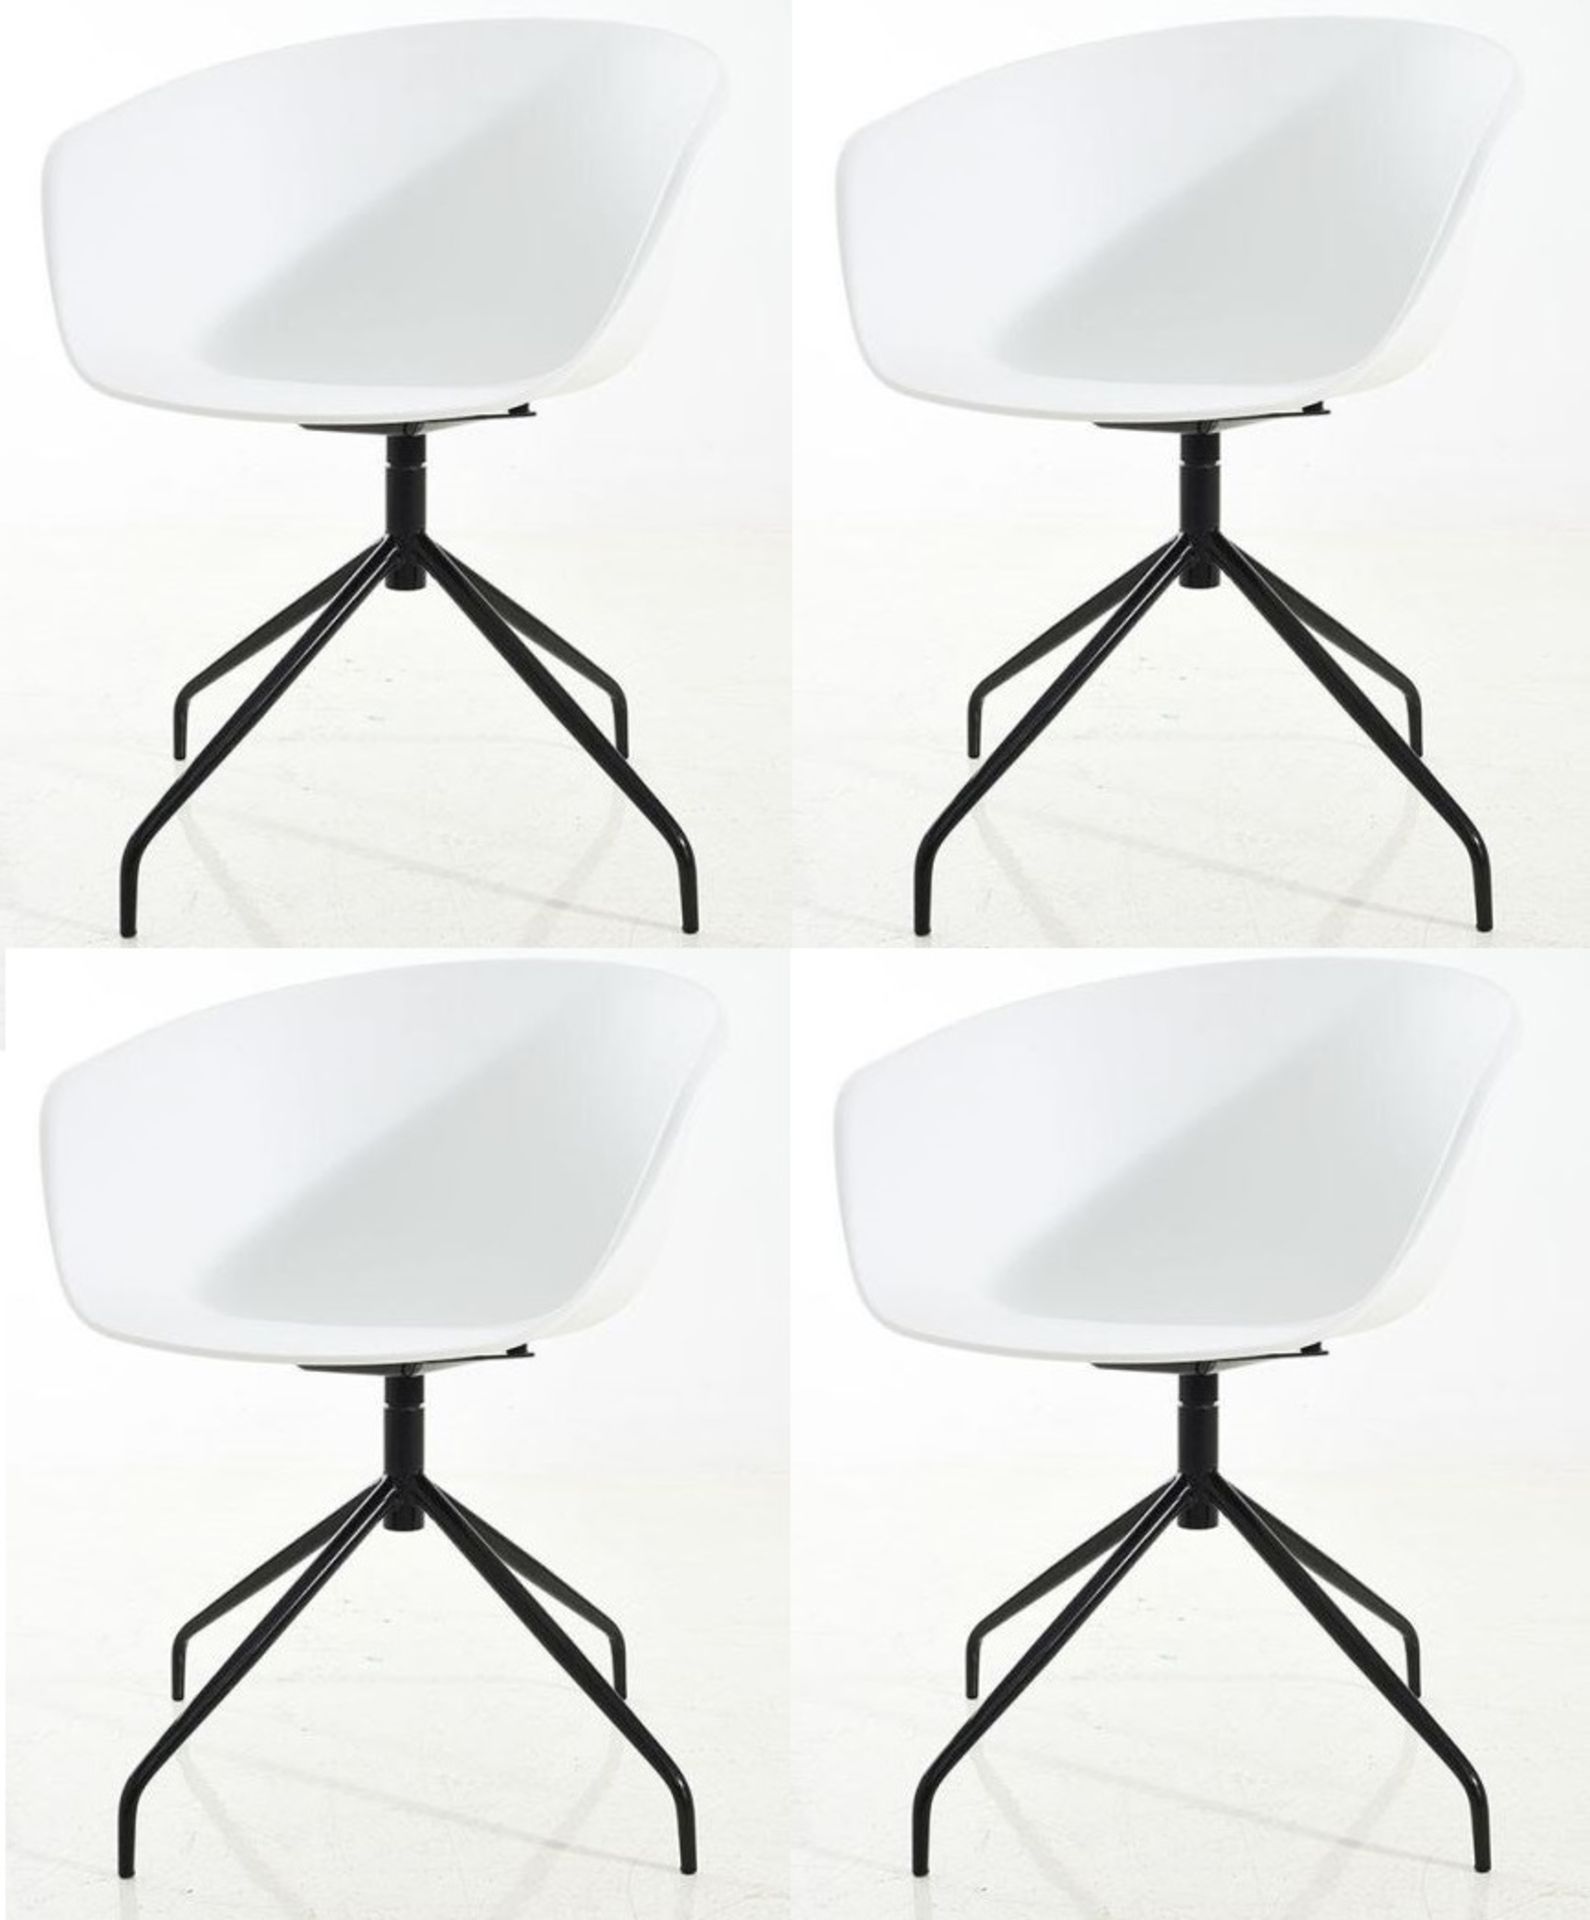 A Set Of 4 x 'NOVA' Elegant Dining Chairs With White Curved Seats And Black Metal Bases - WH3 - - Image 2 of 2